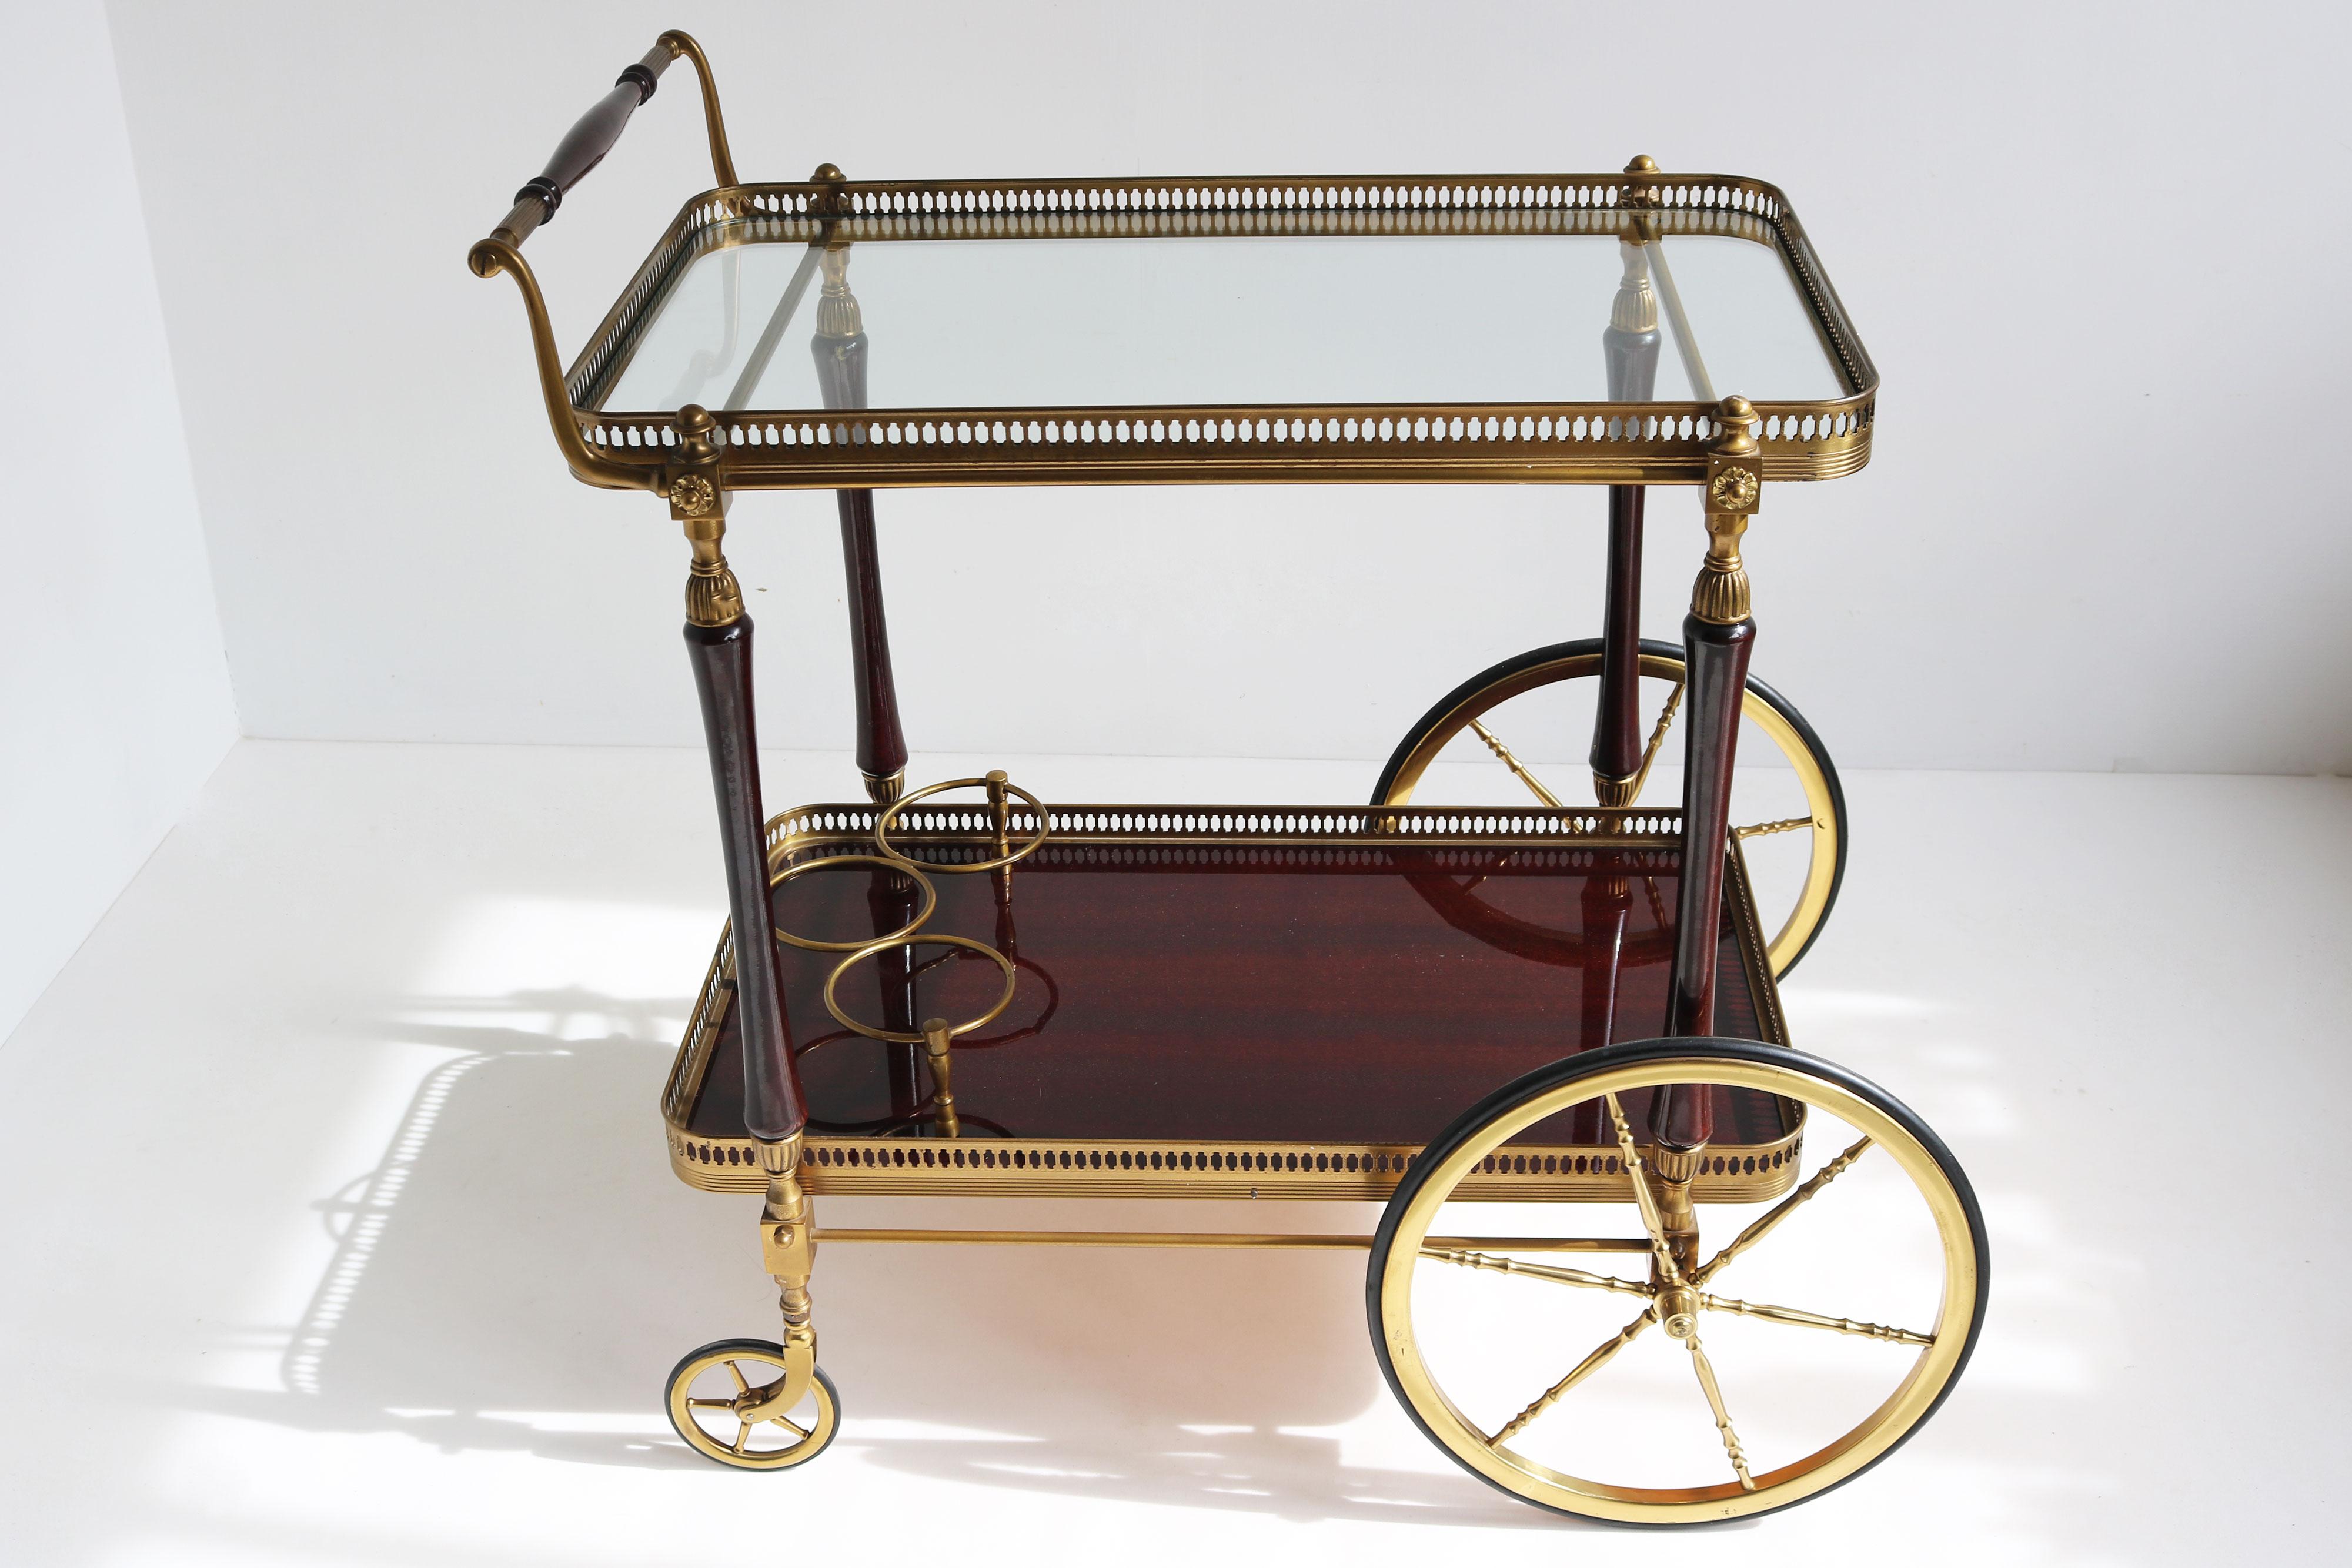 Exquisite luxury bar cart / serving trolley designed by Maison Bagues 1950 in France.The combination between the brass , glass & mahogany is marvelous.  
The bar cart has a glass top , and mahogany shelf with 3 brass bottle holders. Amazing